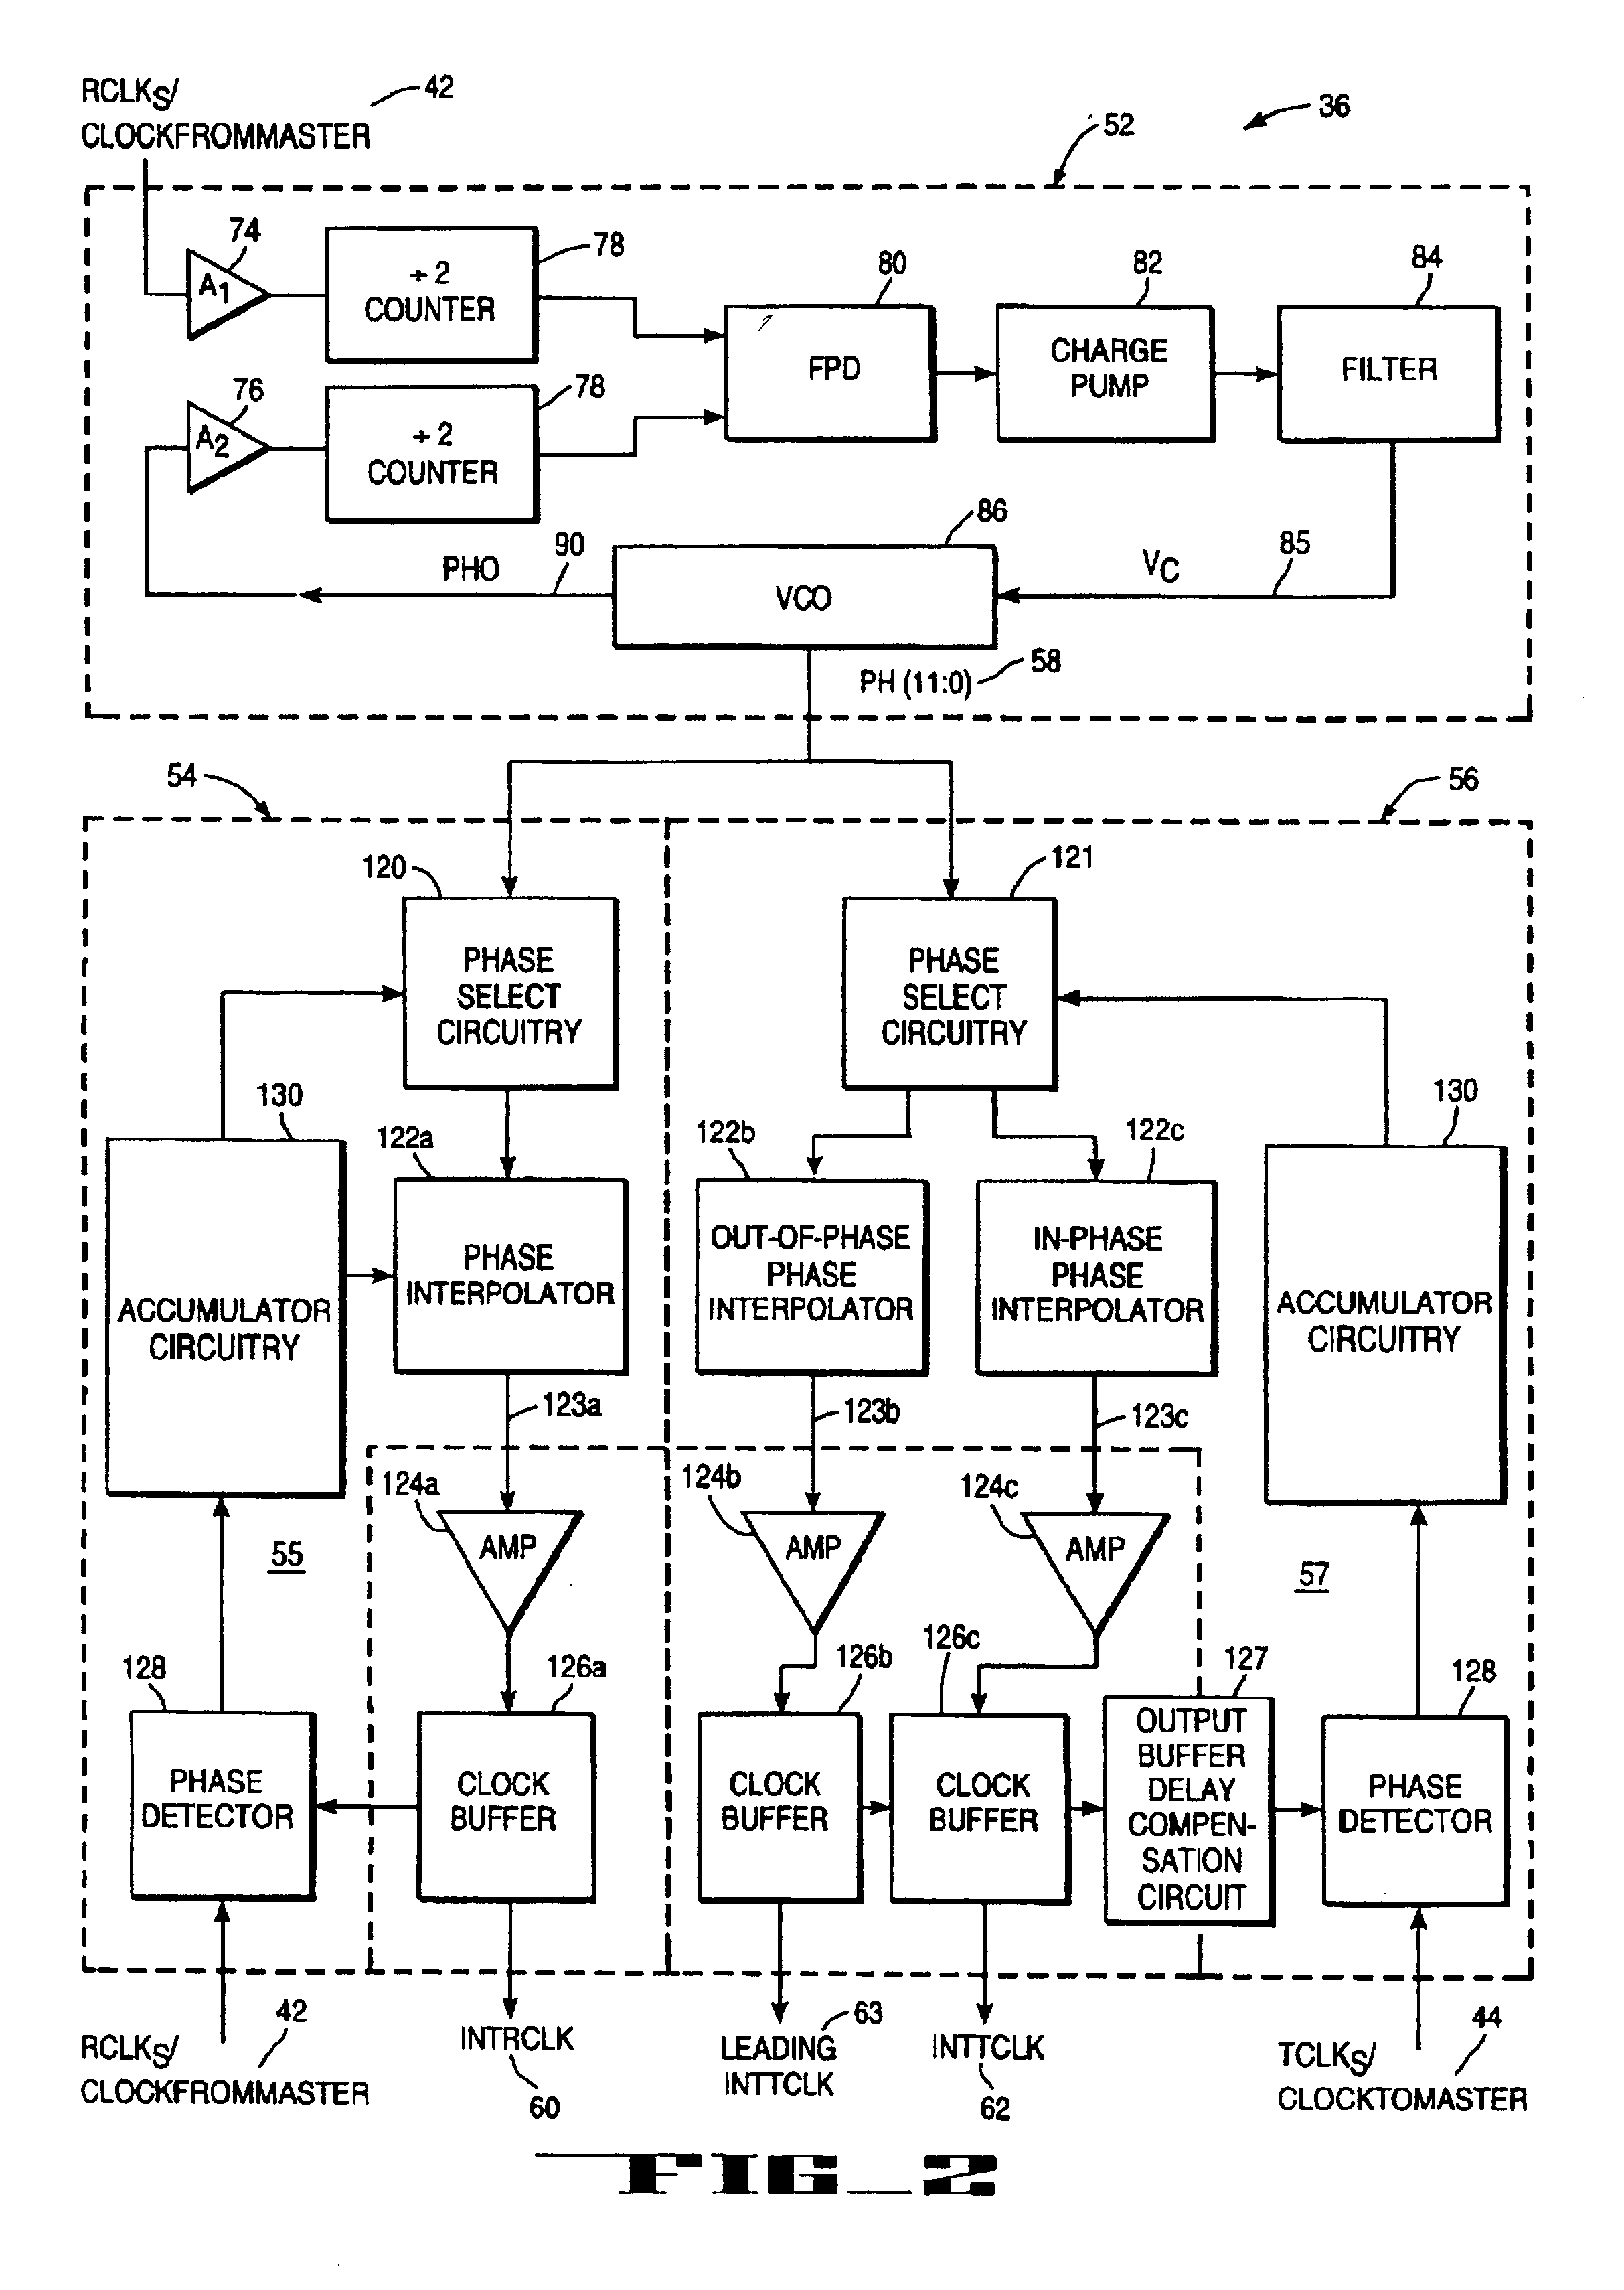 Delay stage circuitry for a ring oscillator